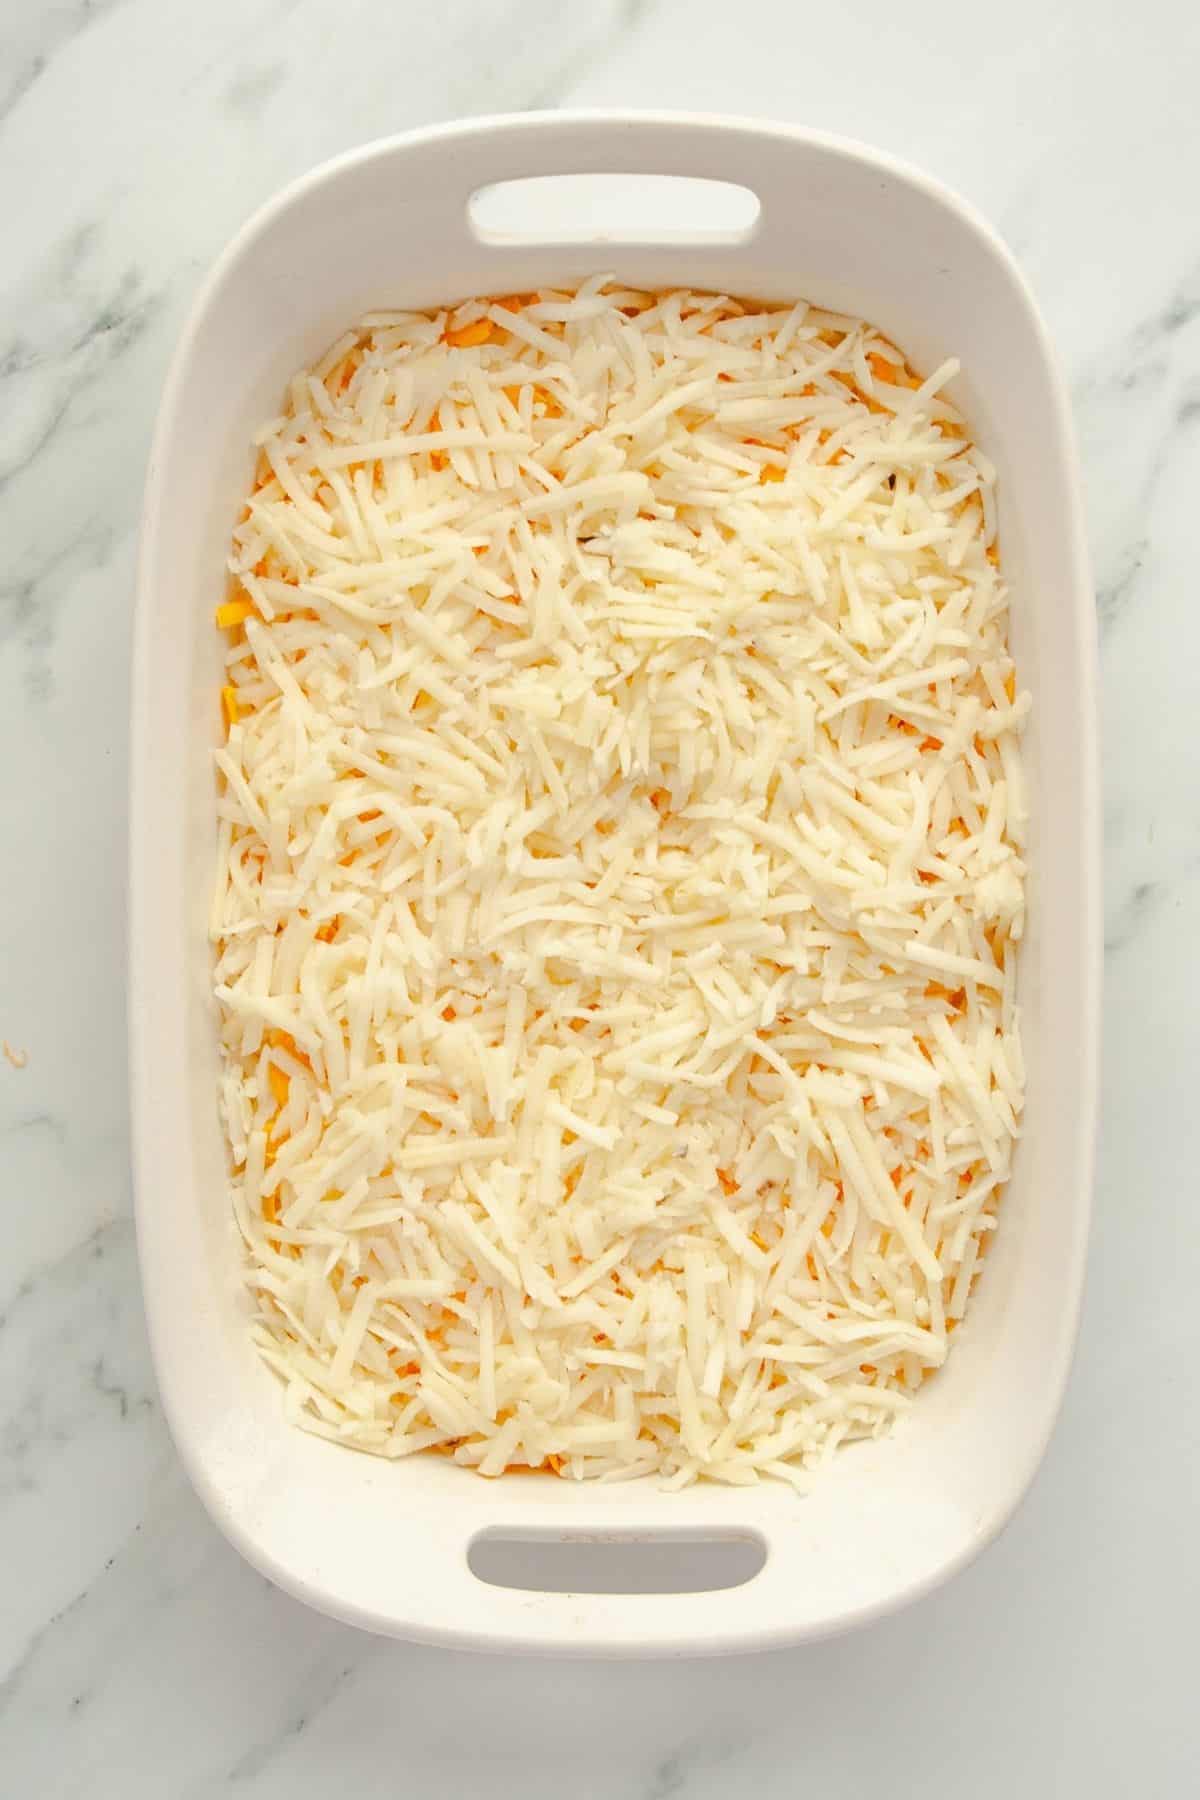 Second layer of hashbrowns in baking dish